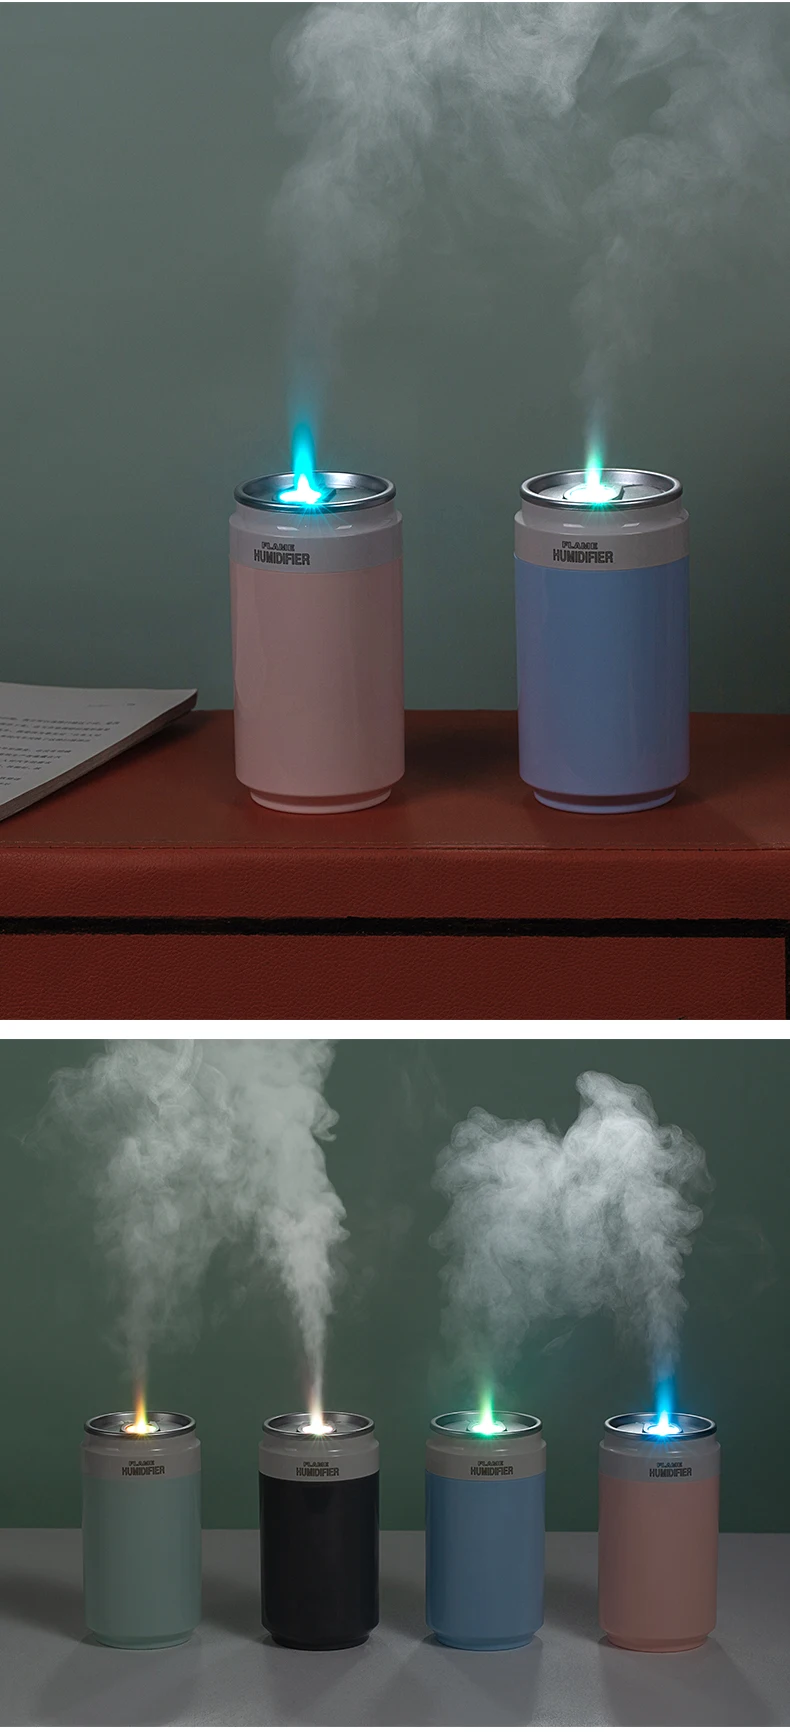 New product hot-selling bedroom can humidifier LED flame lamp cute net red handheld portable mute car USB air humidifier